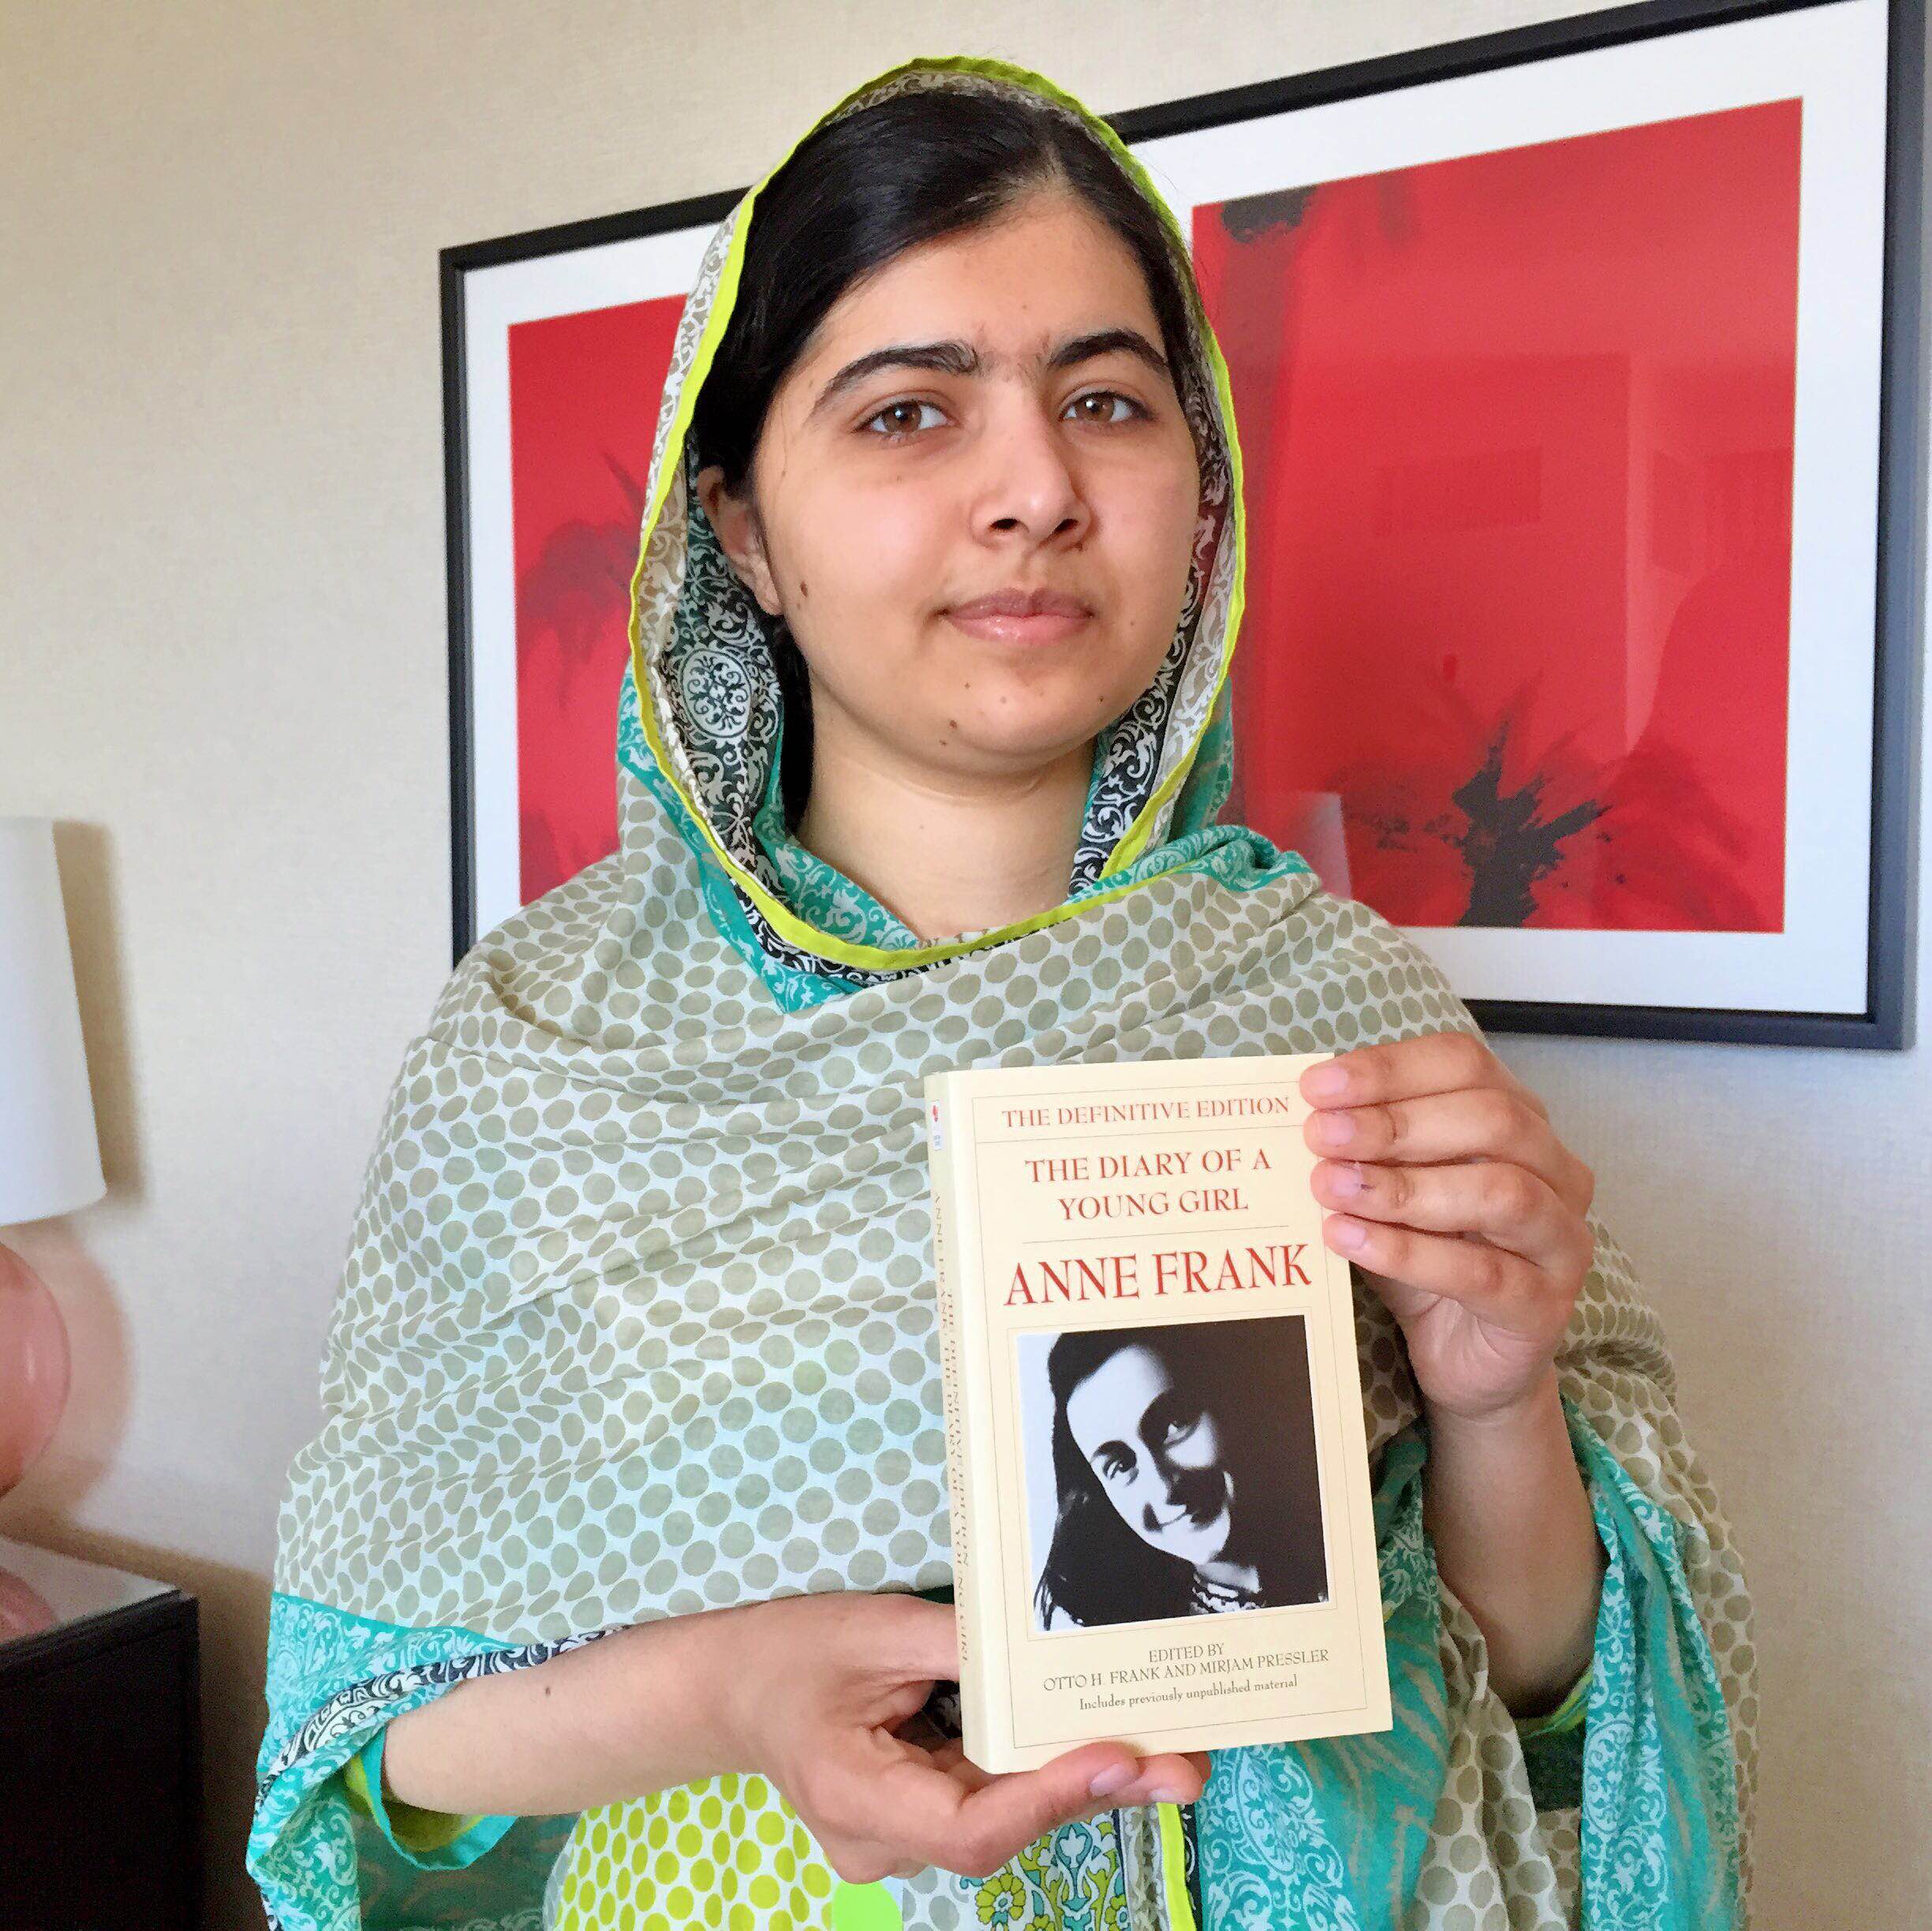 Books not Bullets: A birthday request from Malala